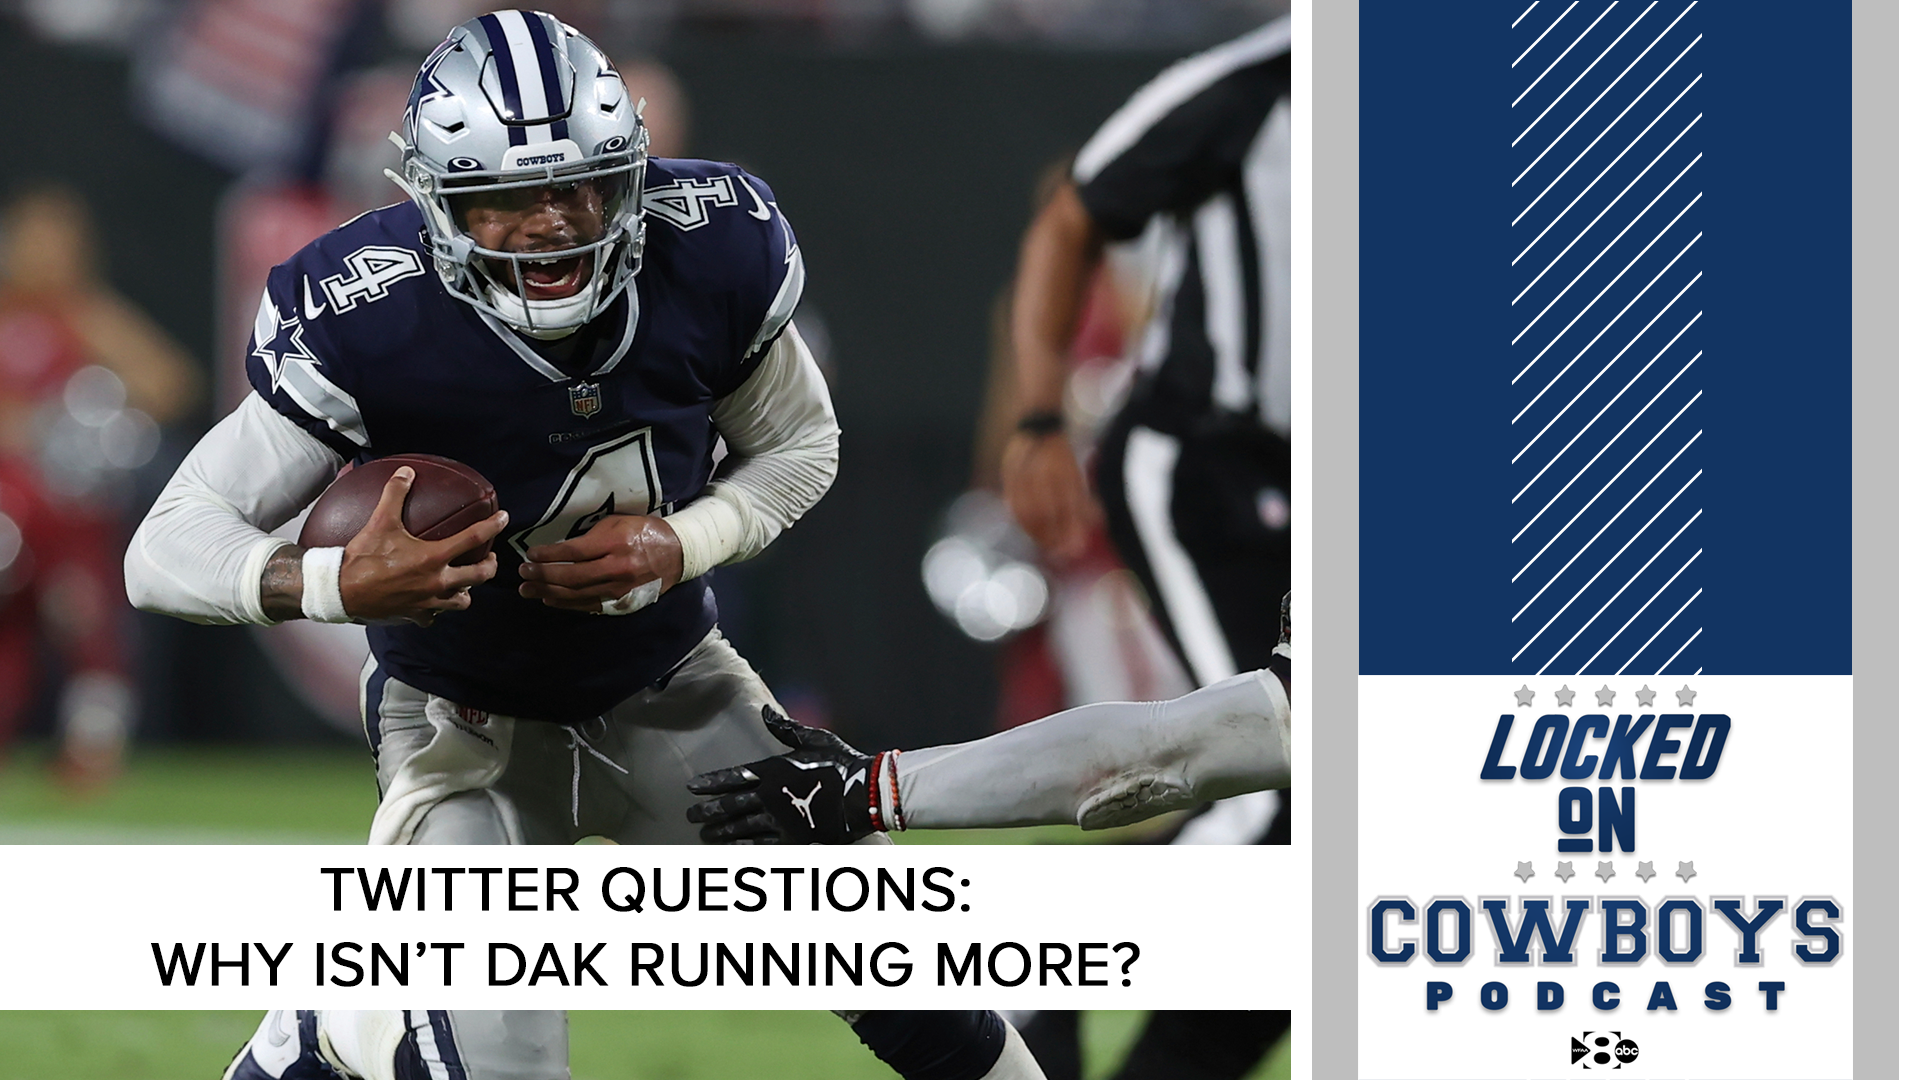 Why isn't Dak Prescott running more and how will the Cowboys use Micah Parsons going forward? @Marcus_Mosher and @McCoolBCB answer your Twitter questions.